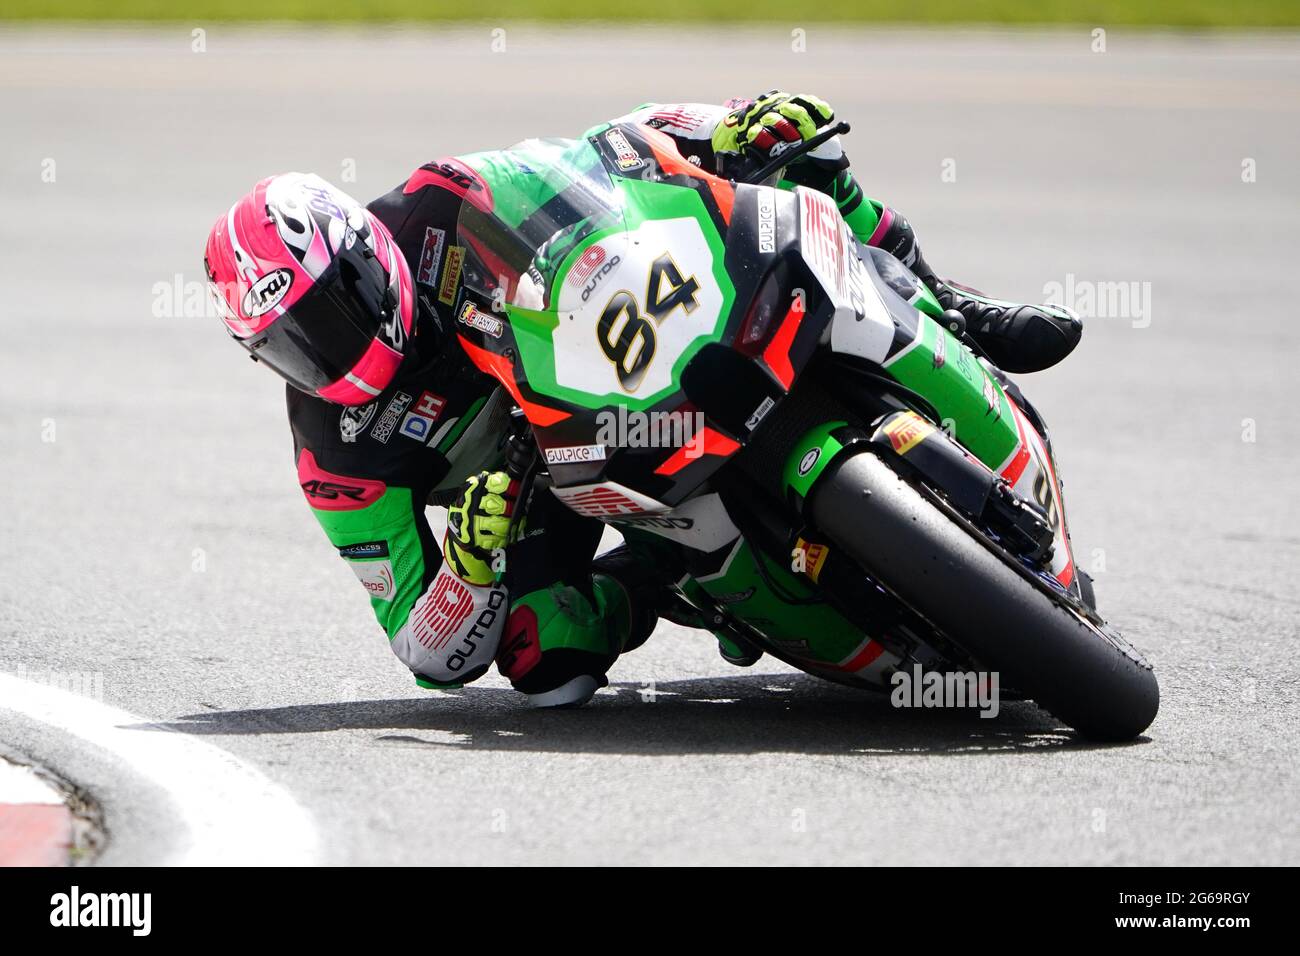 Loris Cresson of OUTDO TPR Team Pedercini Racing in Race 2 during day two of the Motul Fim Superbike Championship 2021 at Donington Park, Leicestershire. Saturday July 4, 2021. Stock Photo